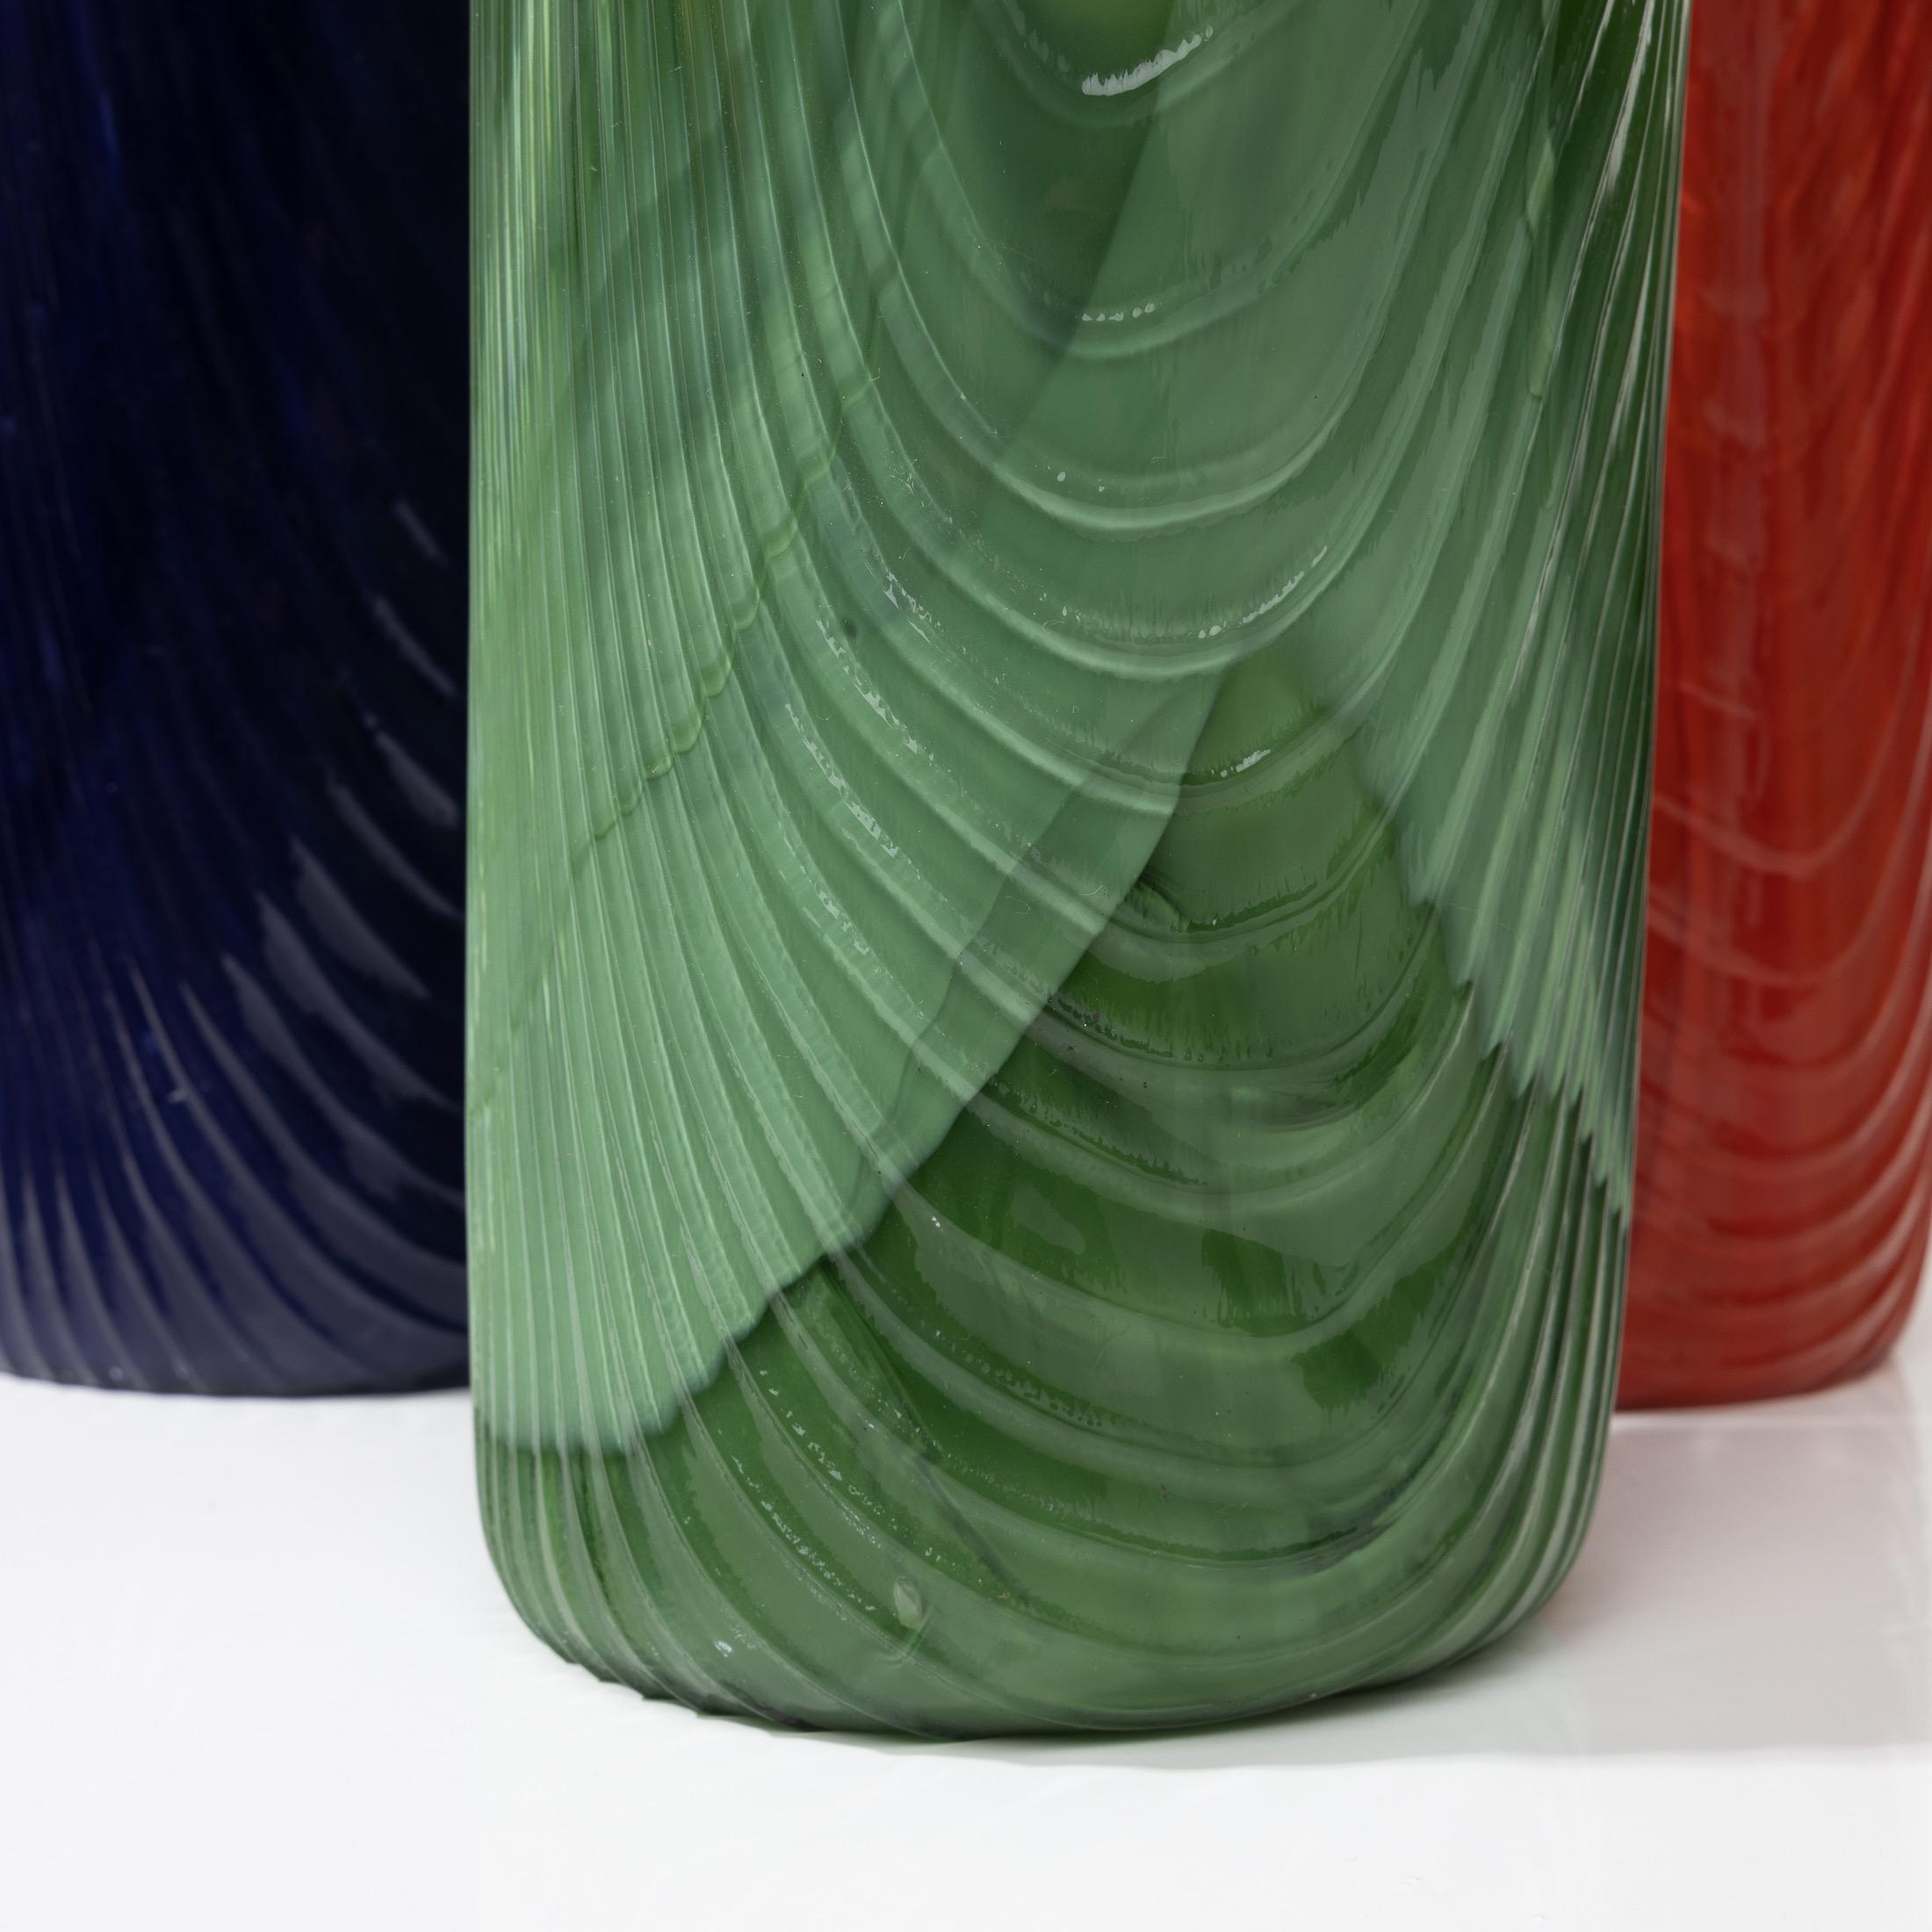 20th Century Set of 3 Vases from the “Tronchi” Series by Toni Zuccheri, Venini, Italy